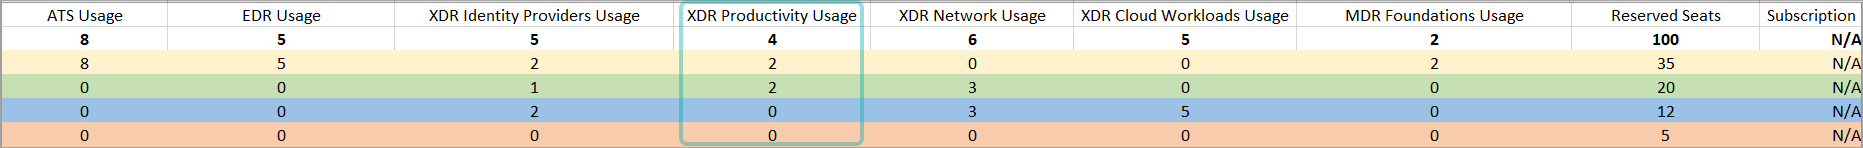 monthly__XDR_Productivity_340181_en.png